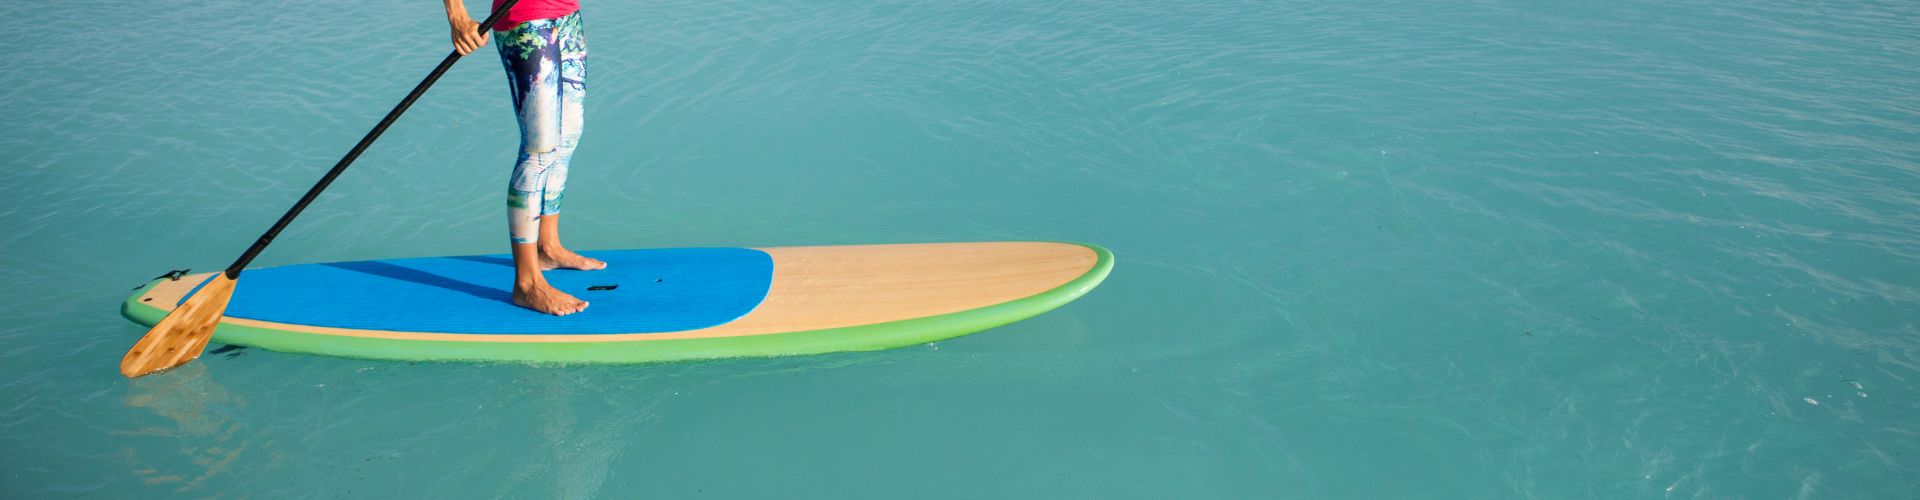 best affordable inflatable paddle board